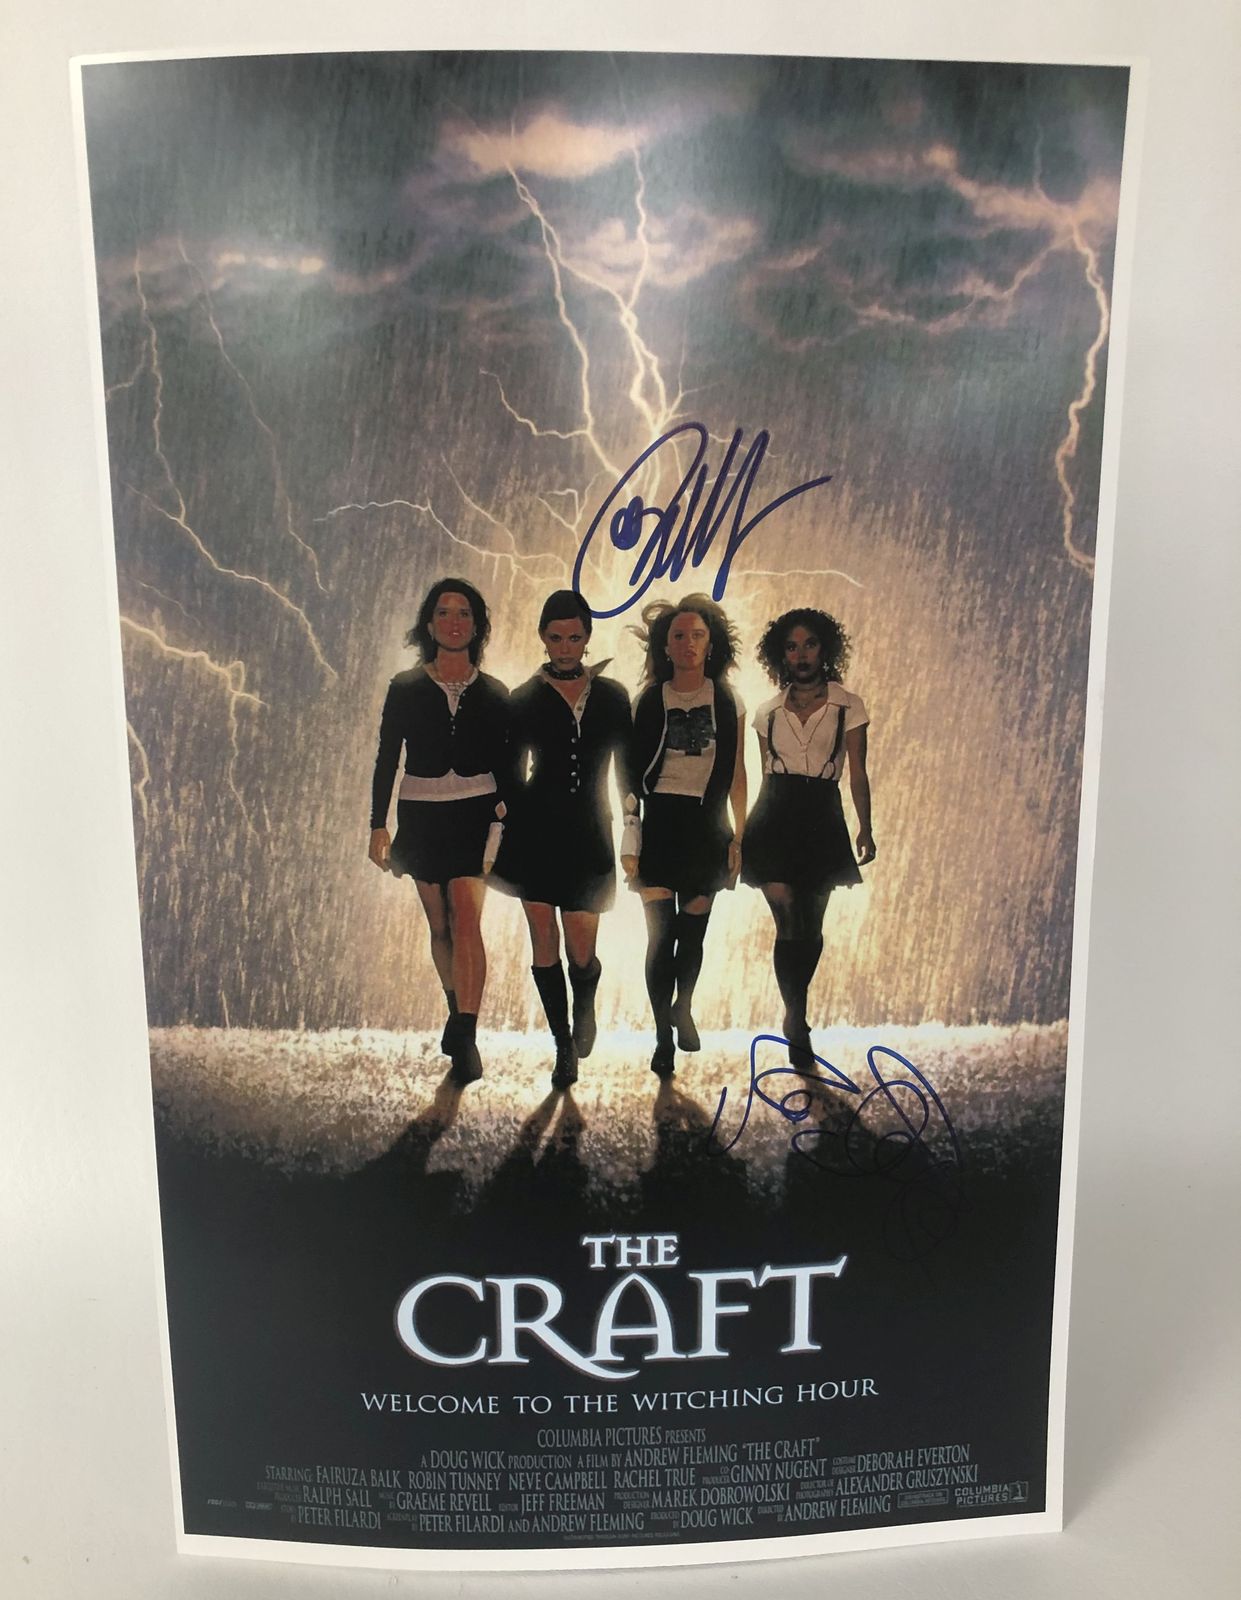 Rachel True & Robin Tunney Signed Autographed "The Craft" 11x17 Movie Poster - $89.99